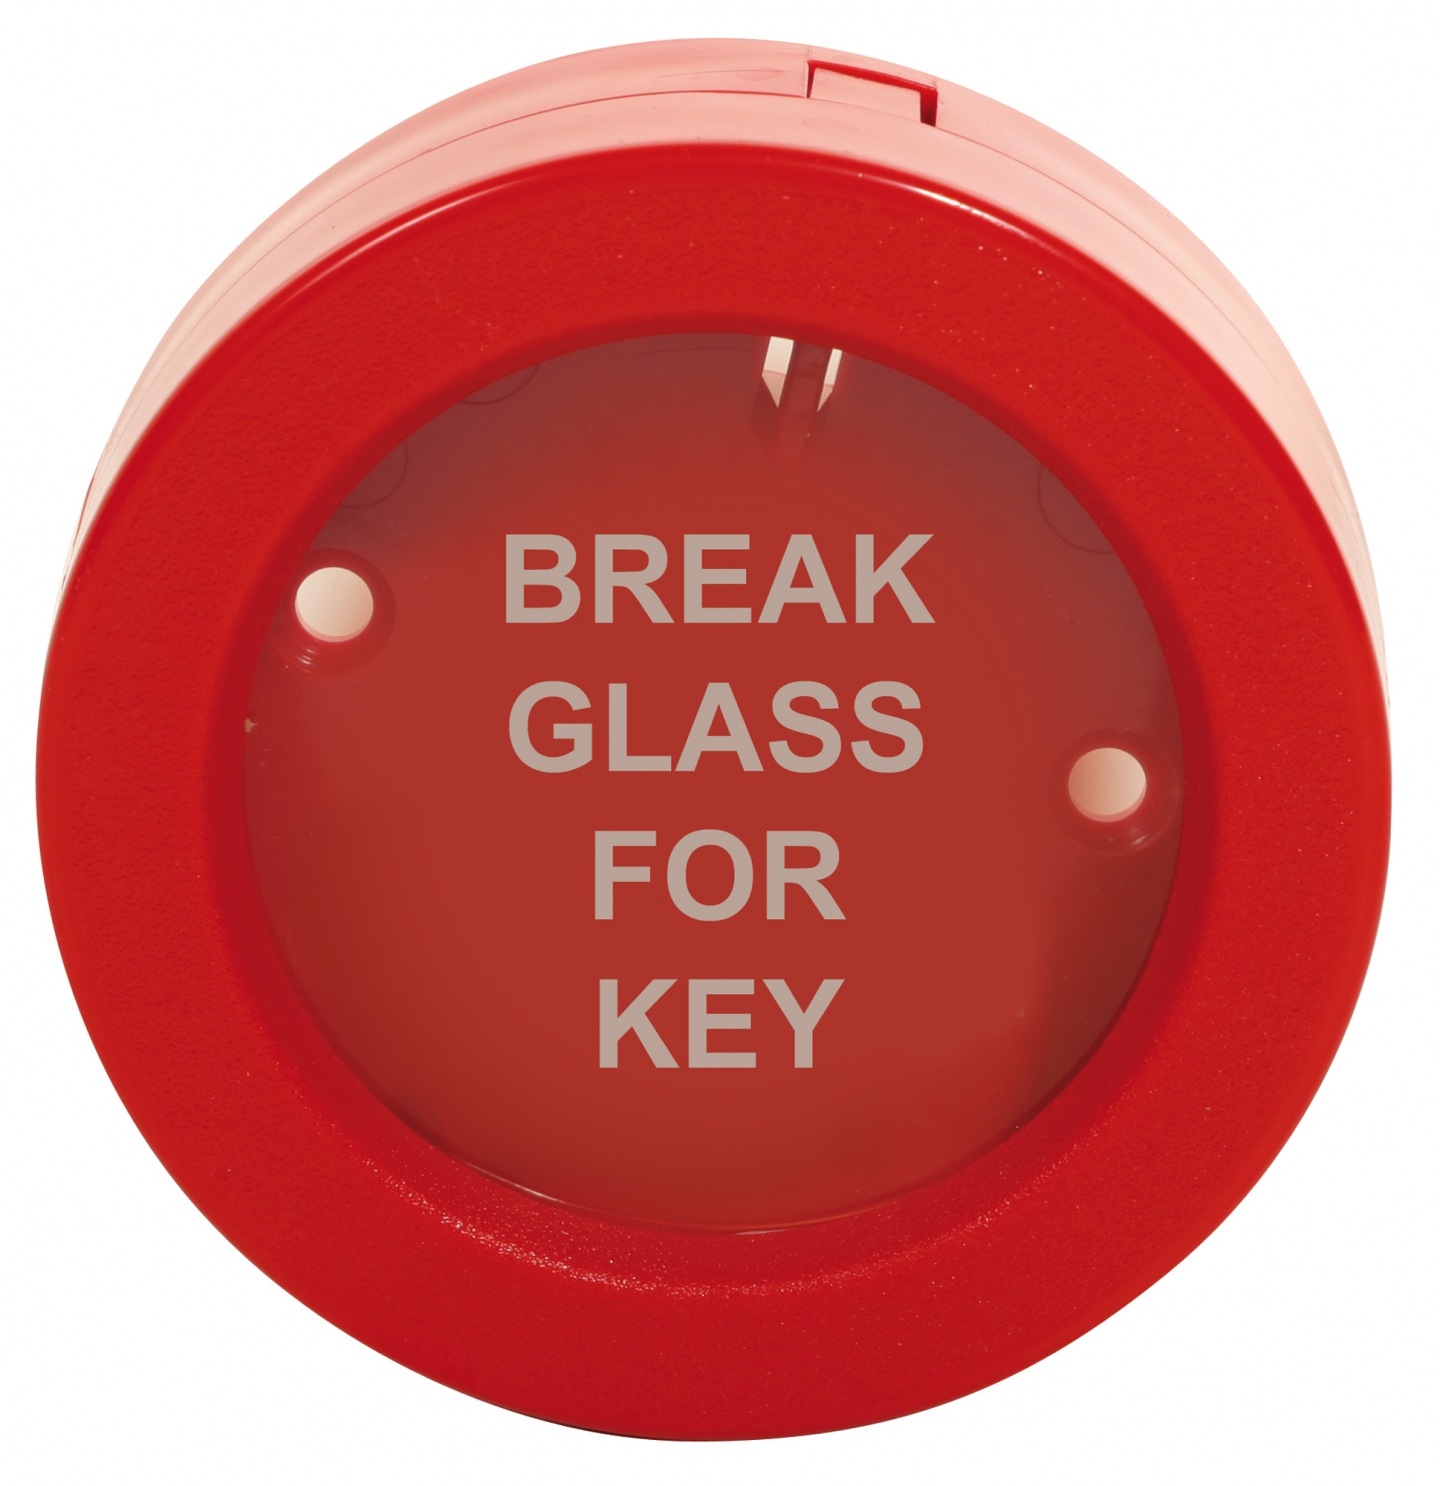 Key Boxes for Emergency Access